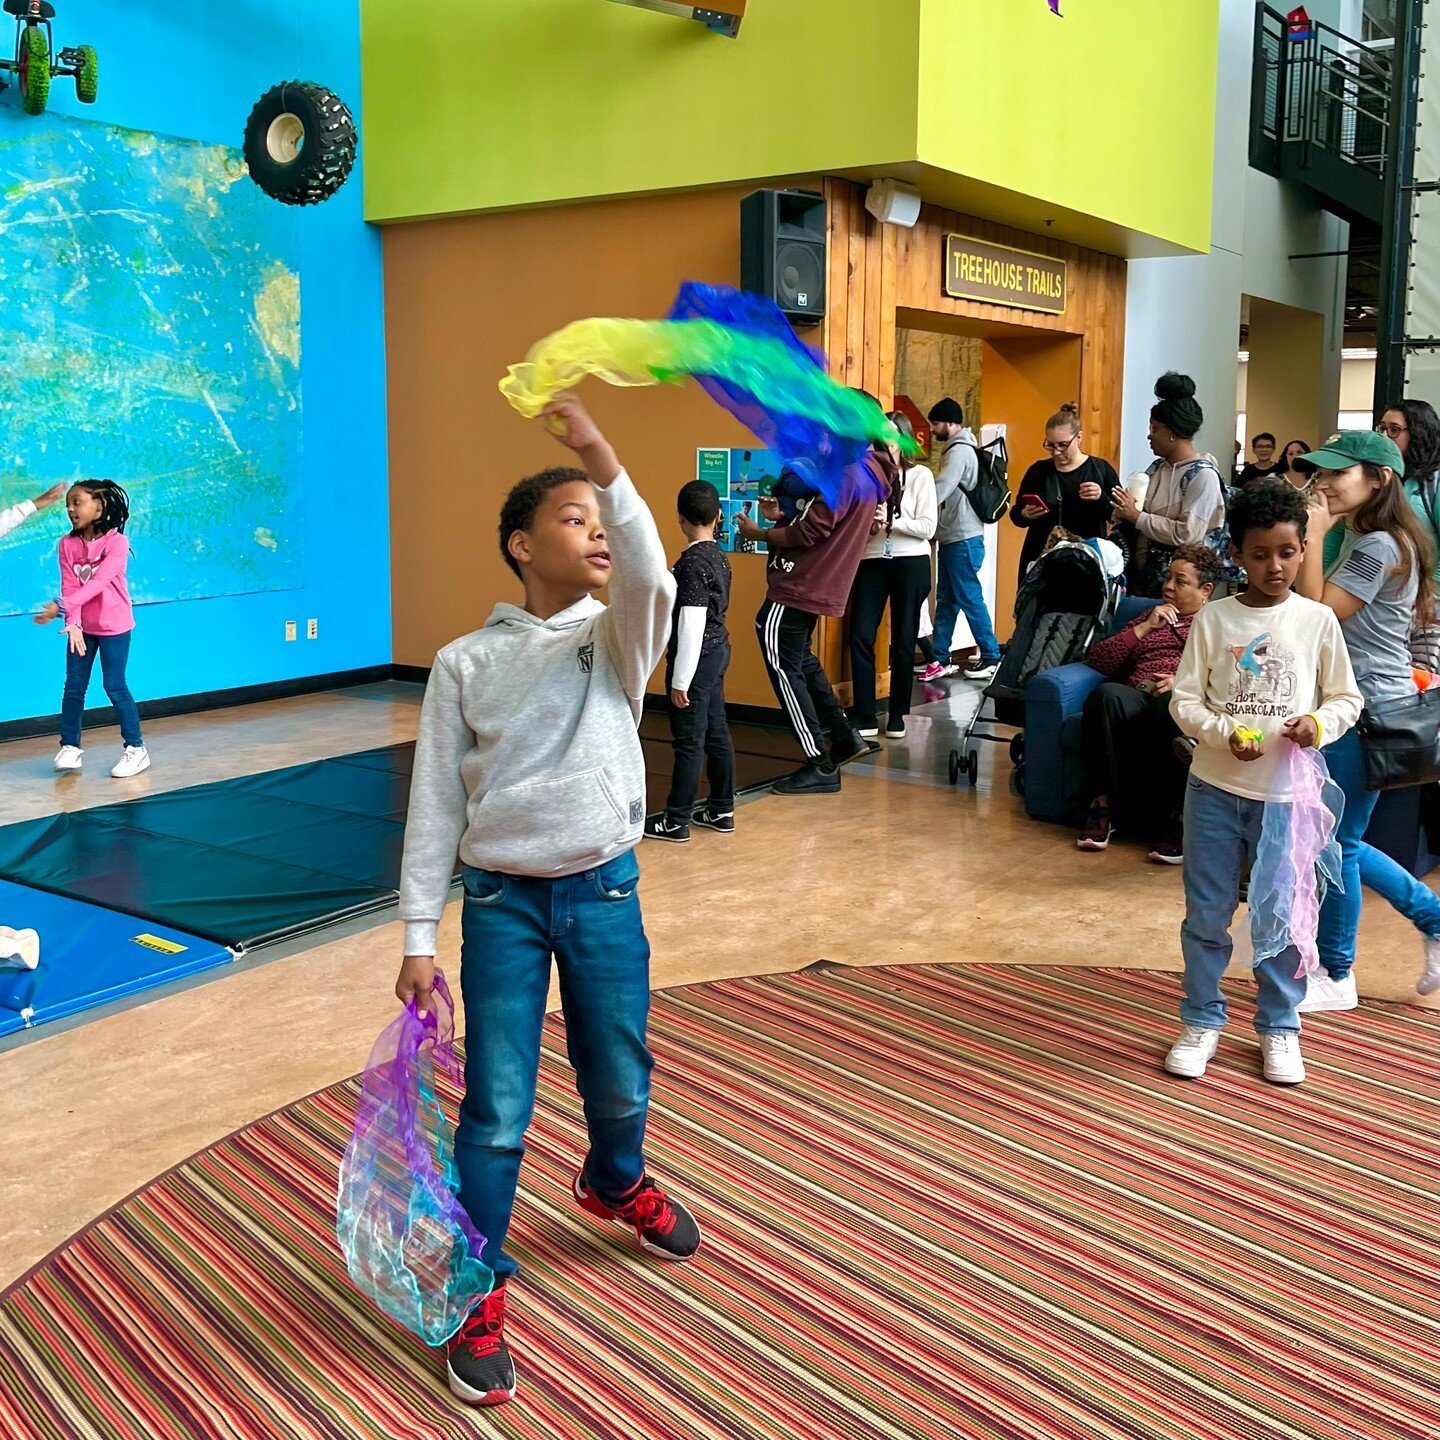 Chicago Children's Museum has welcomed more than ✨ 19,000 ✨ visitors (and counting) since the start of our Spring Break Play Days... and we can't wait to welcome many more!

Now through April 7, we're welcoming community partners like @ActorsGym, @Ol